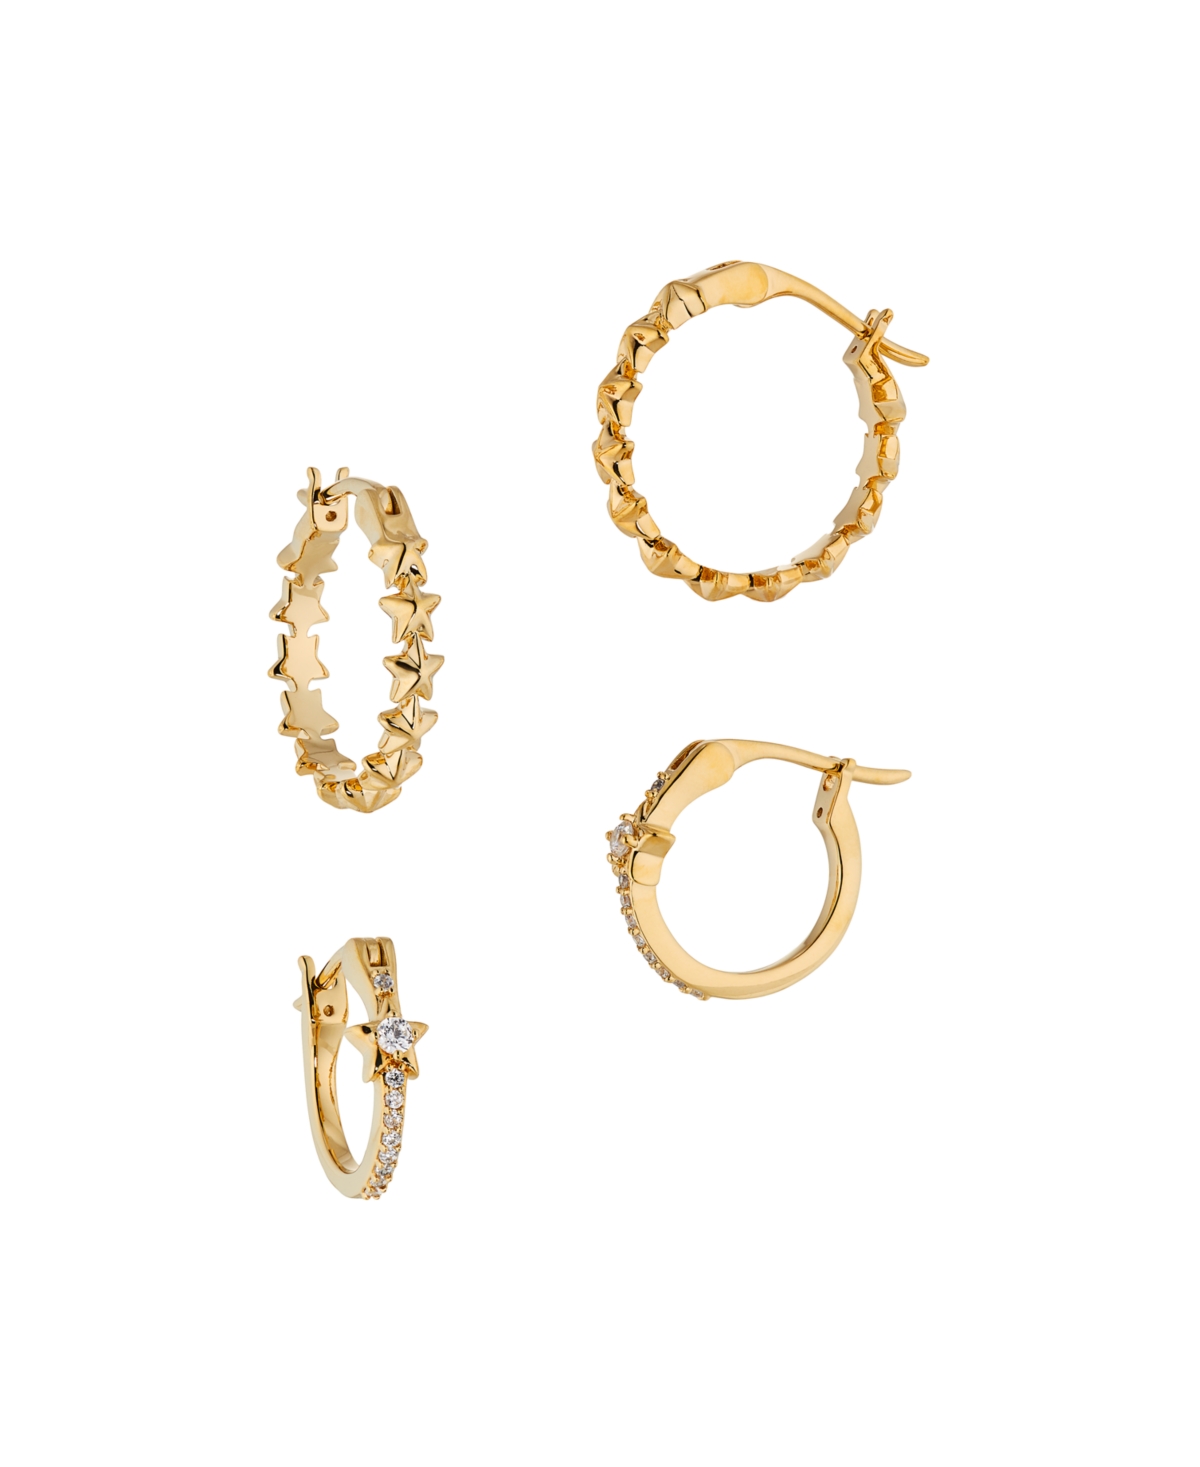 Small Hoop Earrings in 18K Gold Plated Brass Set 4 Pieces - K Gold Plated